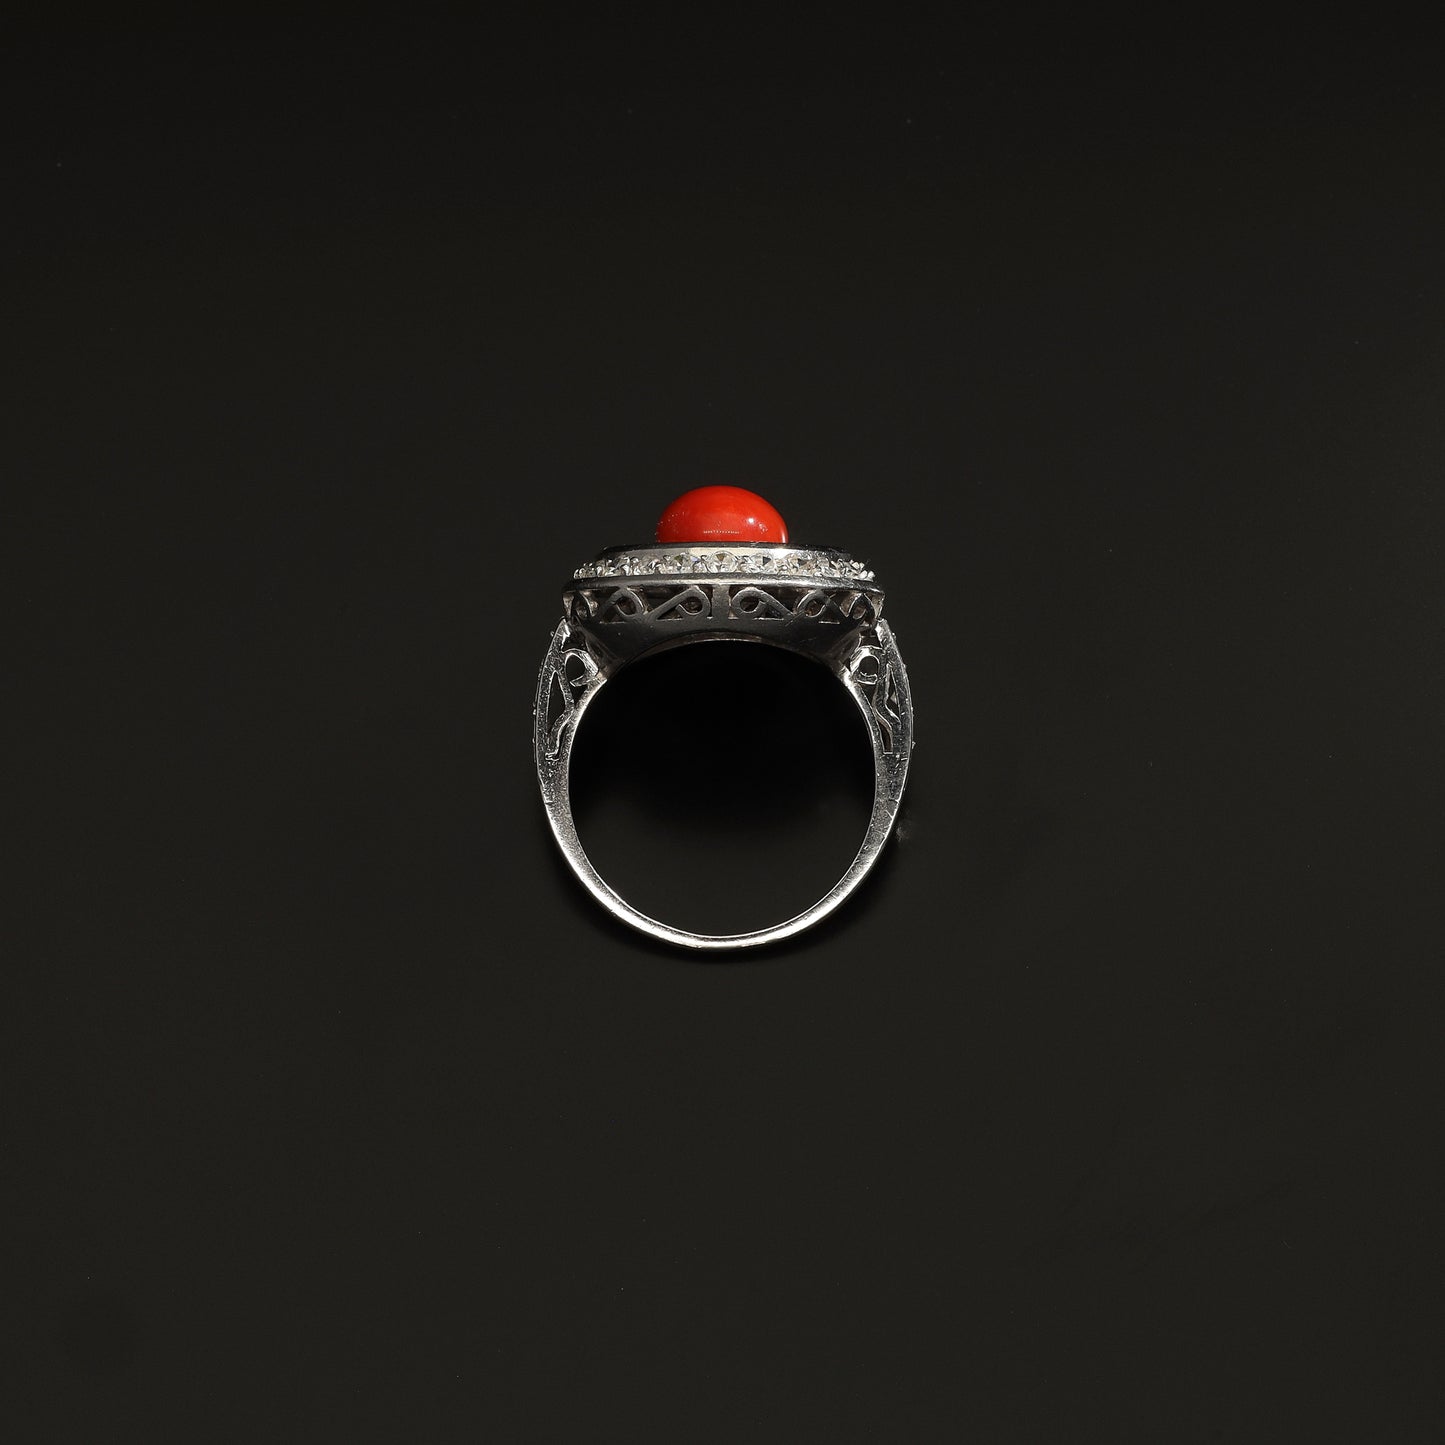 Absolutely STUNNING Art Deco coral and diamond ring. Born in the South of Italy, this magnificent ring is crafted in solid 18 kt white gold! The ring is heavy - it weights whooping 8 grams - and is preserved in a superb state. The round crown is set with a lovely Sicilian coral surrounded by a double halo of 40 sparkling diamonds.